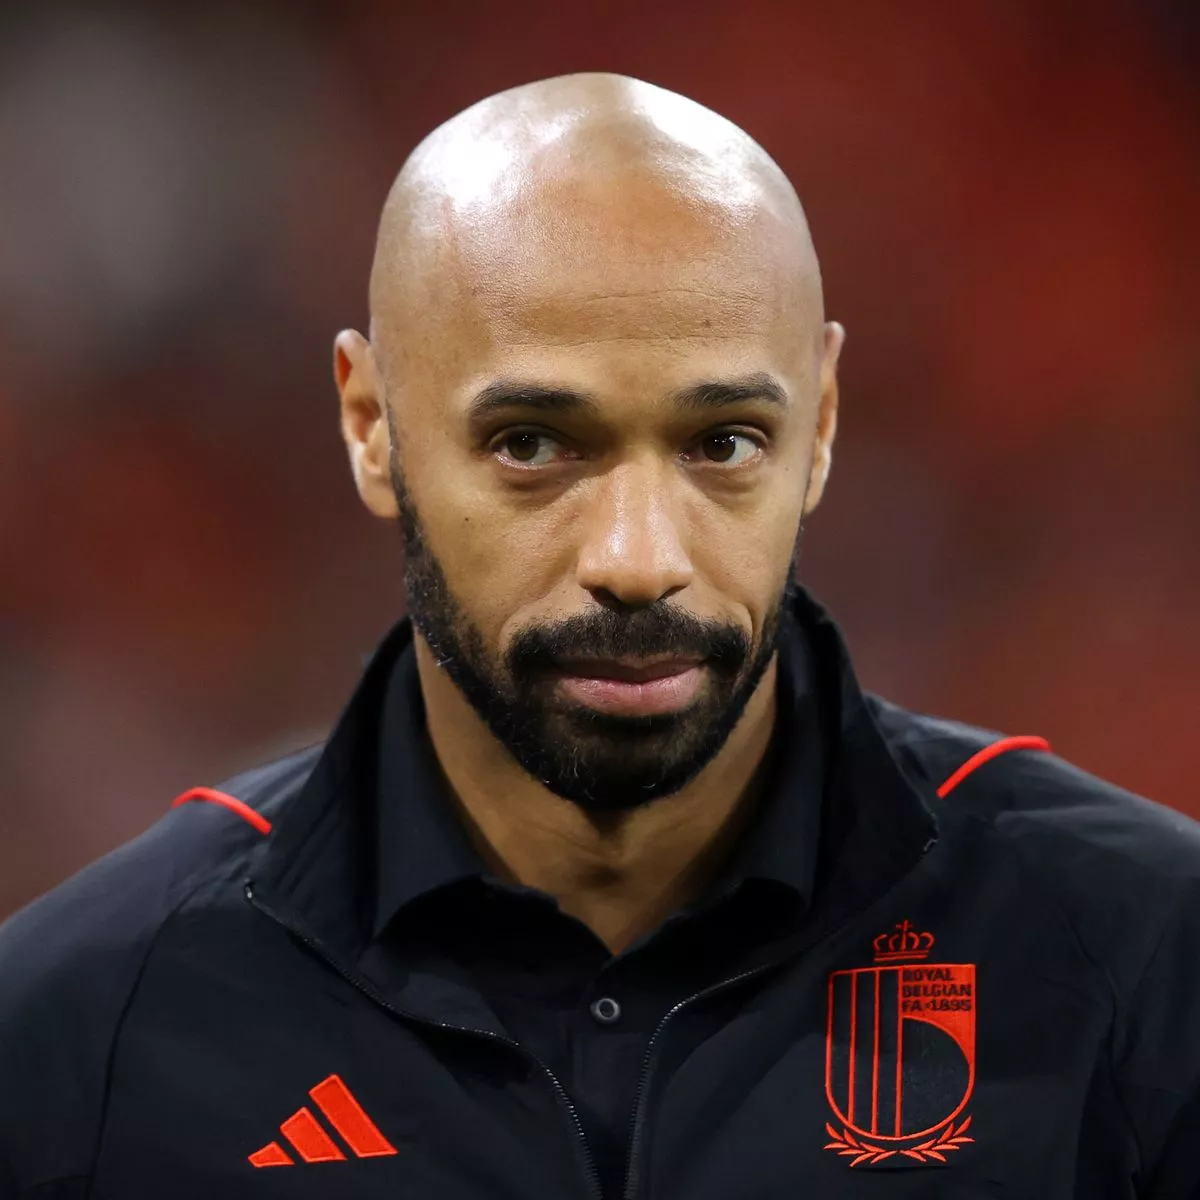 Leave Arsenal -- Thierry Henry tells Arsenal star